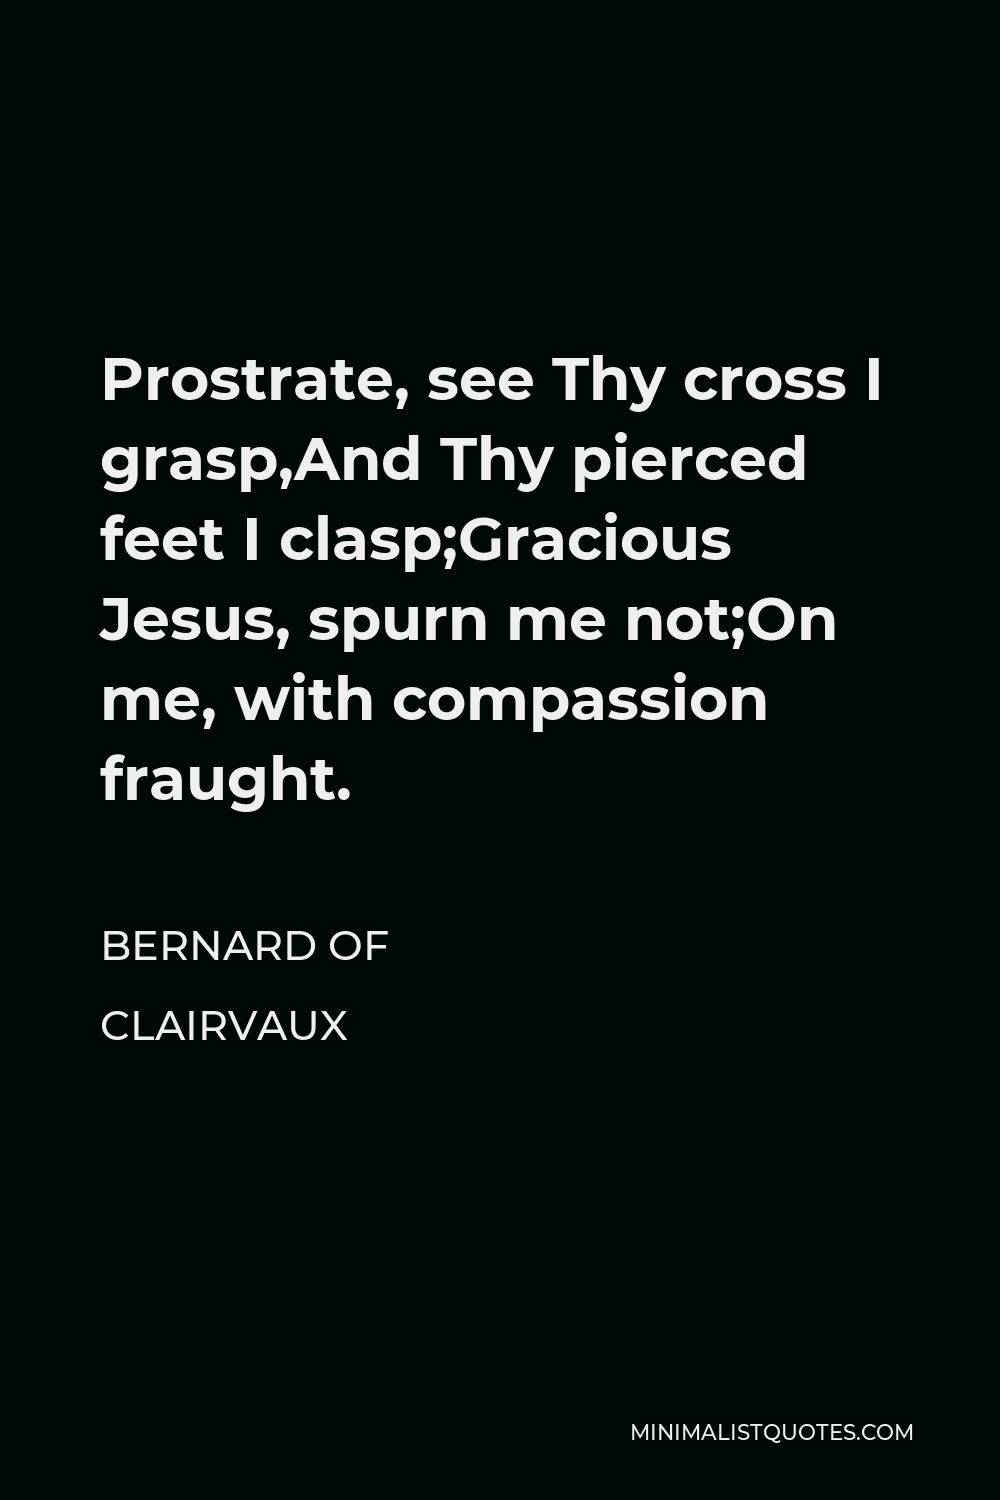 Bernard of Clairvaux Quote - Prostrate, see Thy cross I grasp,And Thy pierced feet I clasp;Gracious Jesus, spurn me not;On me, with compassion fraught.